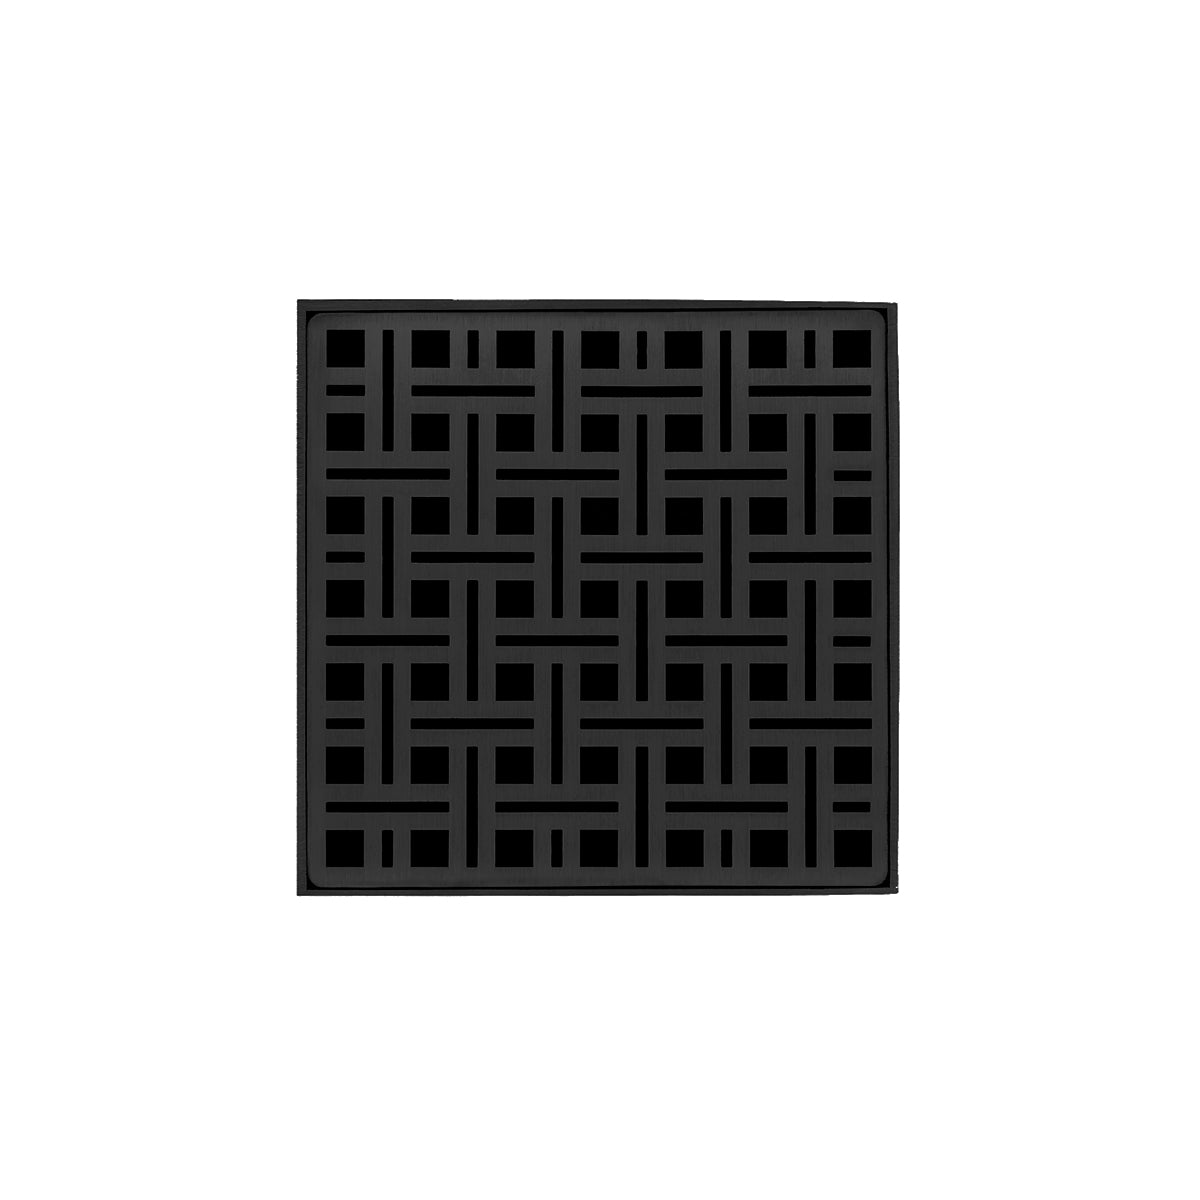 Infinity Drain 5" x 5" VDB 5 Premium Center Drain Kit with Weave Pattern Decorative Plate with PVC Bonded Flange Drain Body, 2", 3" and 4" Outlet